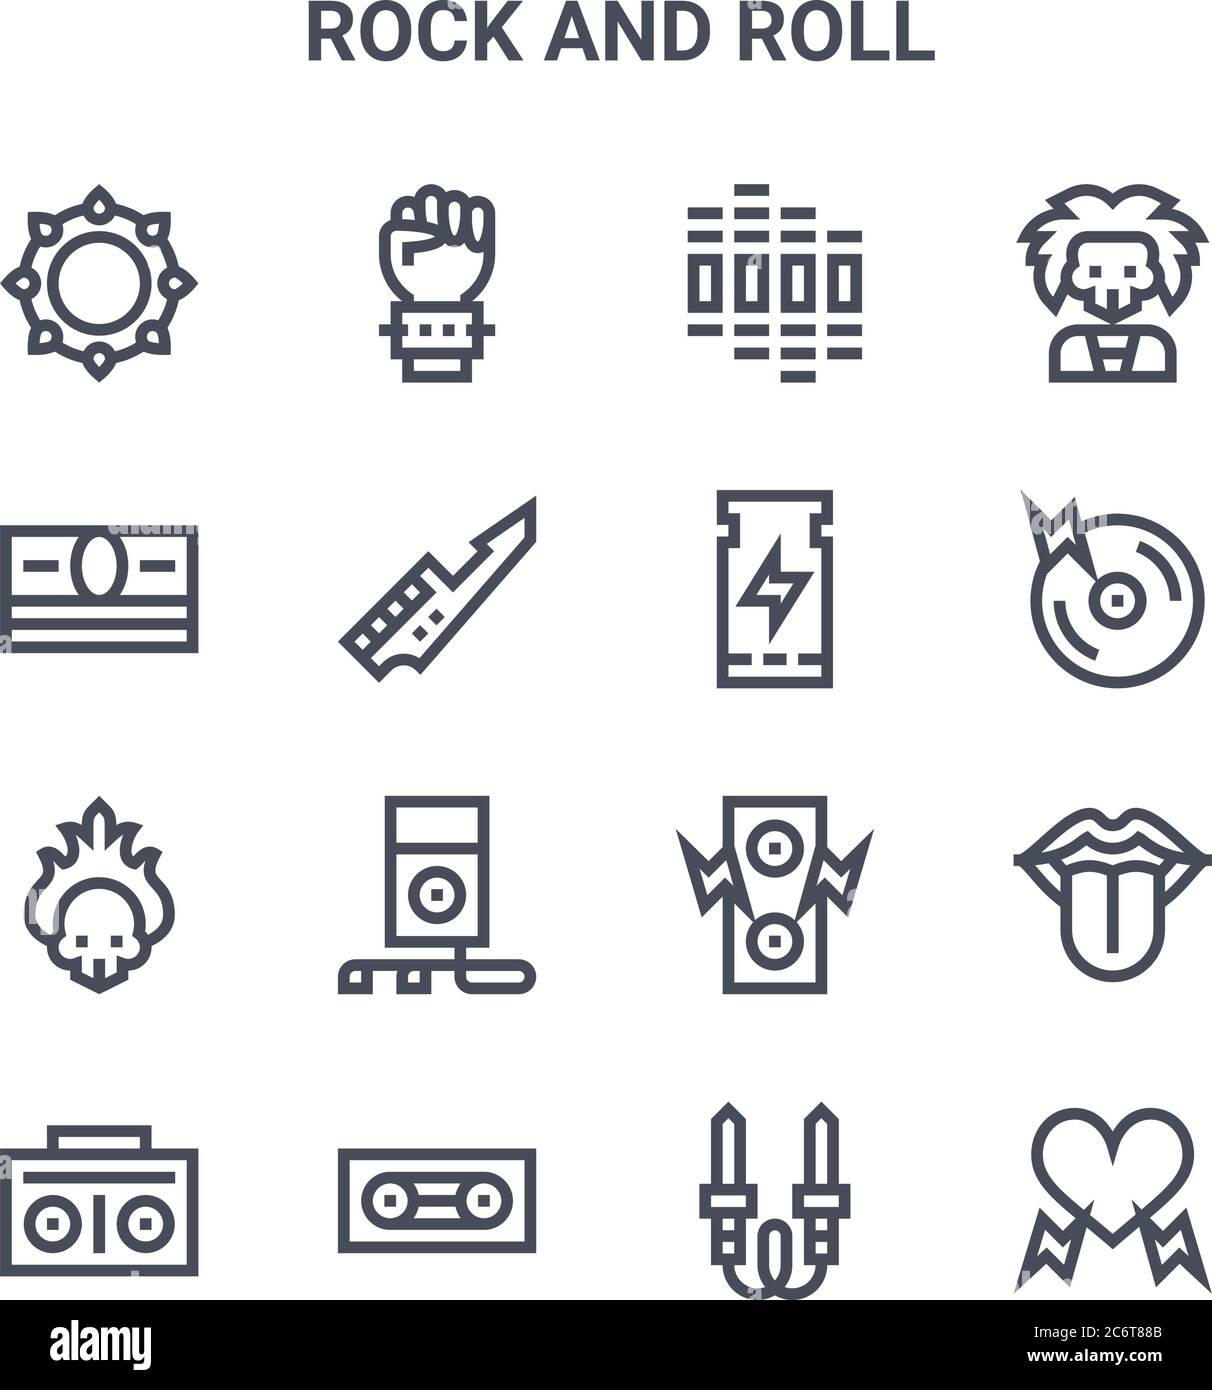 set of 16 rock and roll concept vector line icons. 64x64 thin stroke icons such as hand, money, cd, speaker, cassette tape, heart, audio jack, ticket, Stock Vector